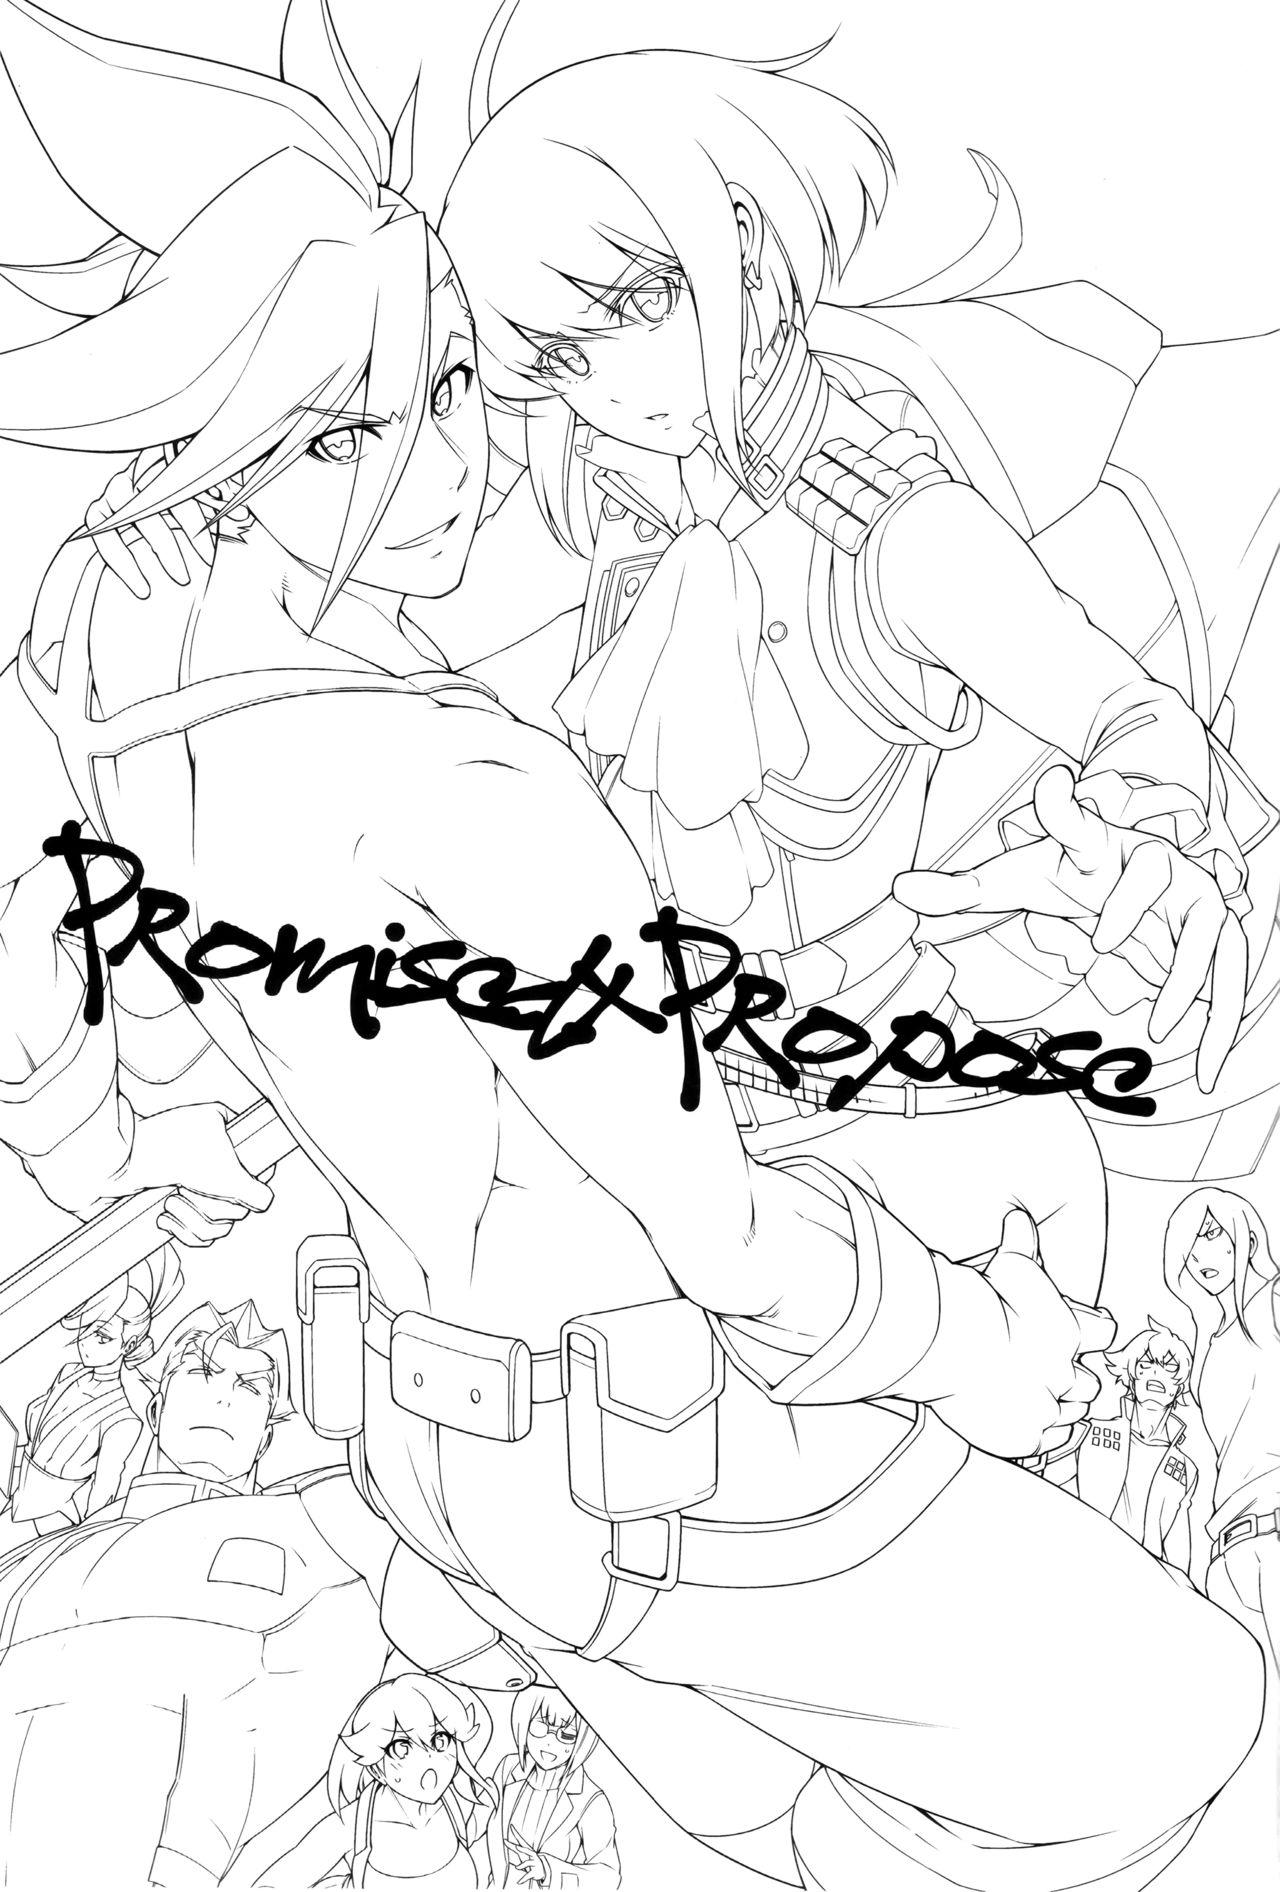 Gay Theresome PROMISED PROPOSE - Promare Exhib - Page 3